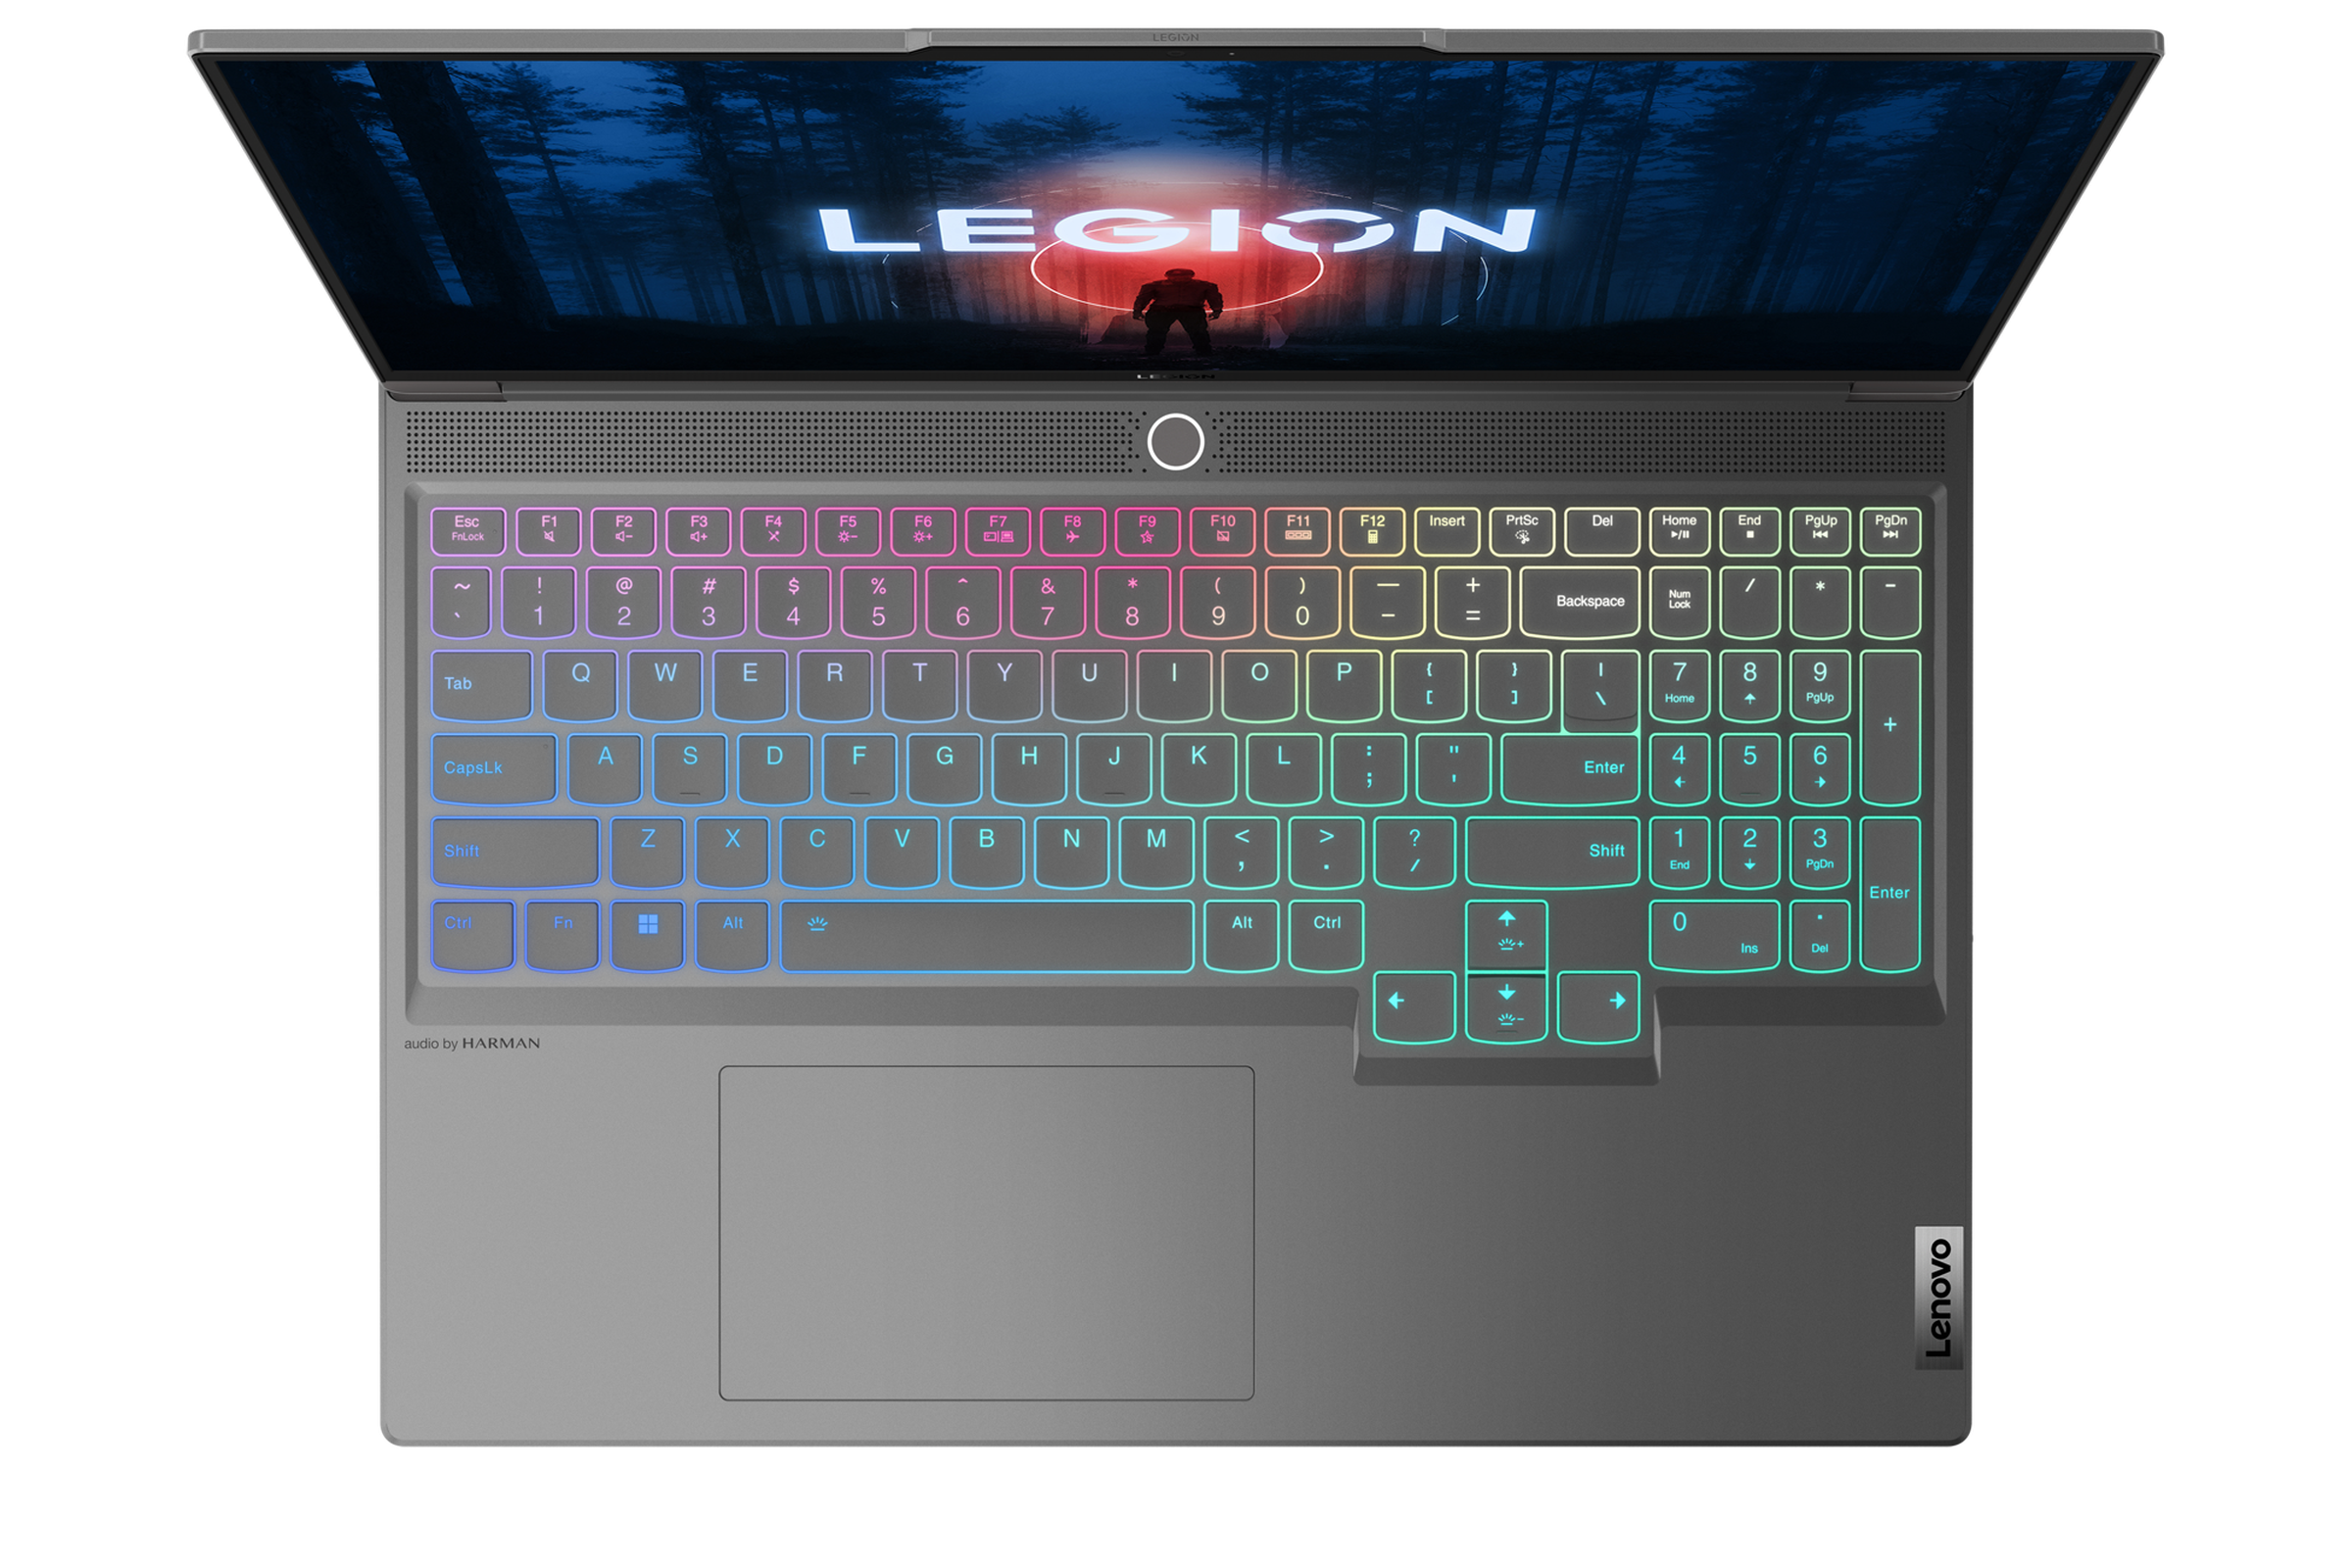 The Legion Slim 7i keyboard seen from above. The screen displays the Legion logo.